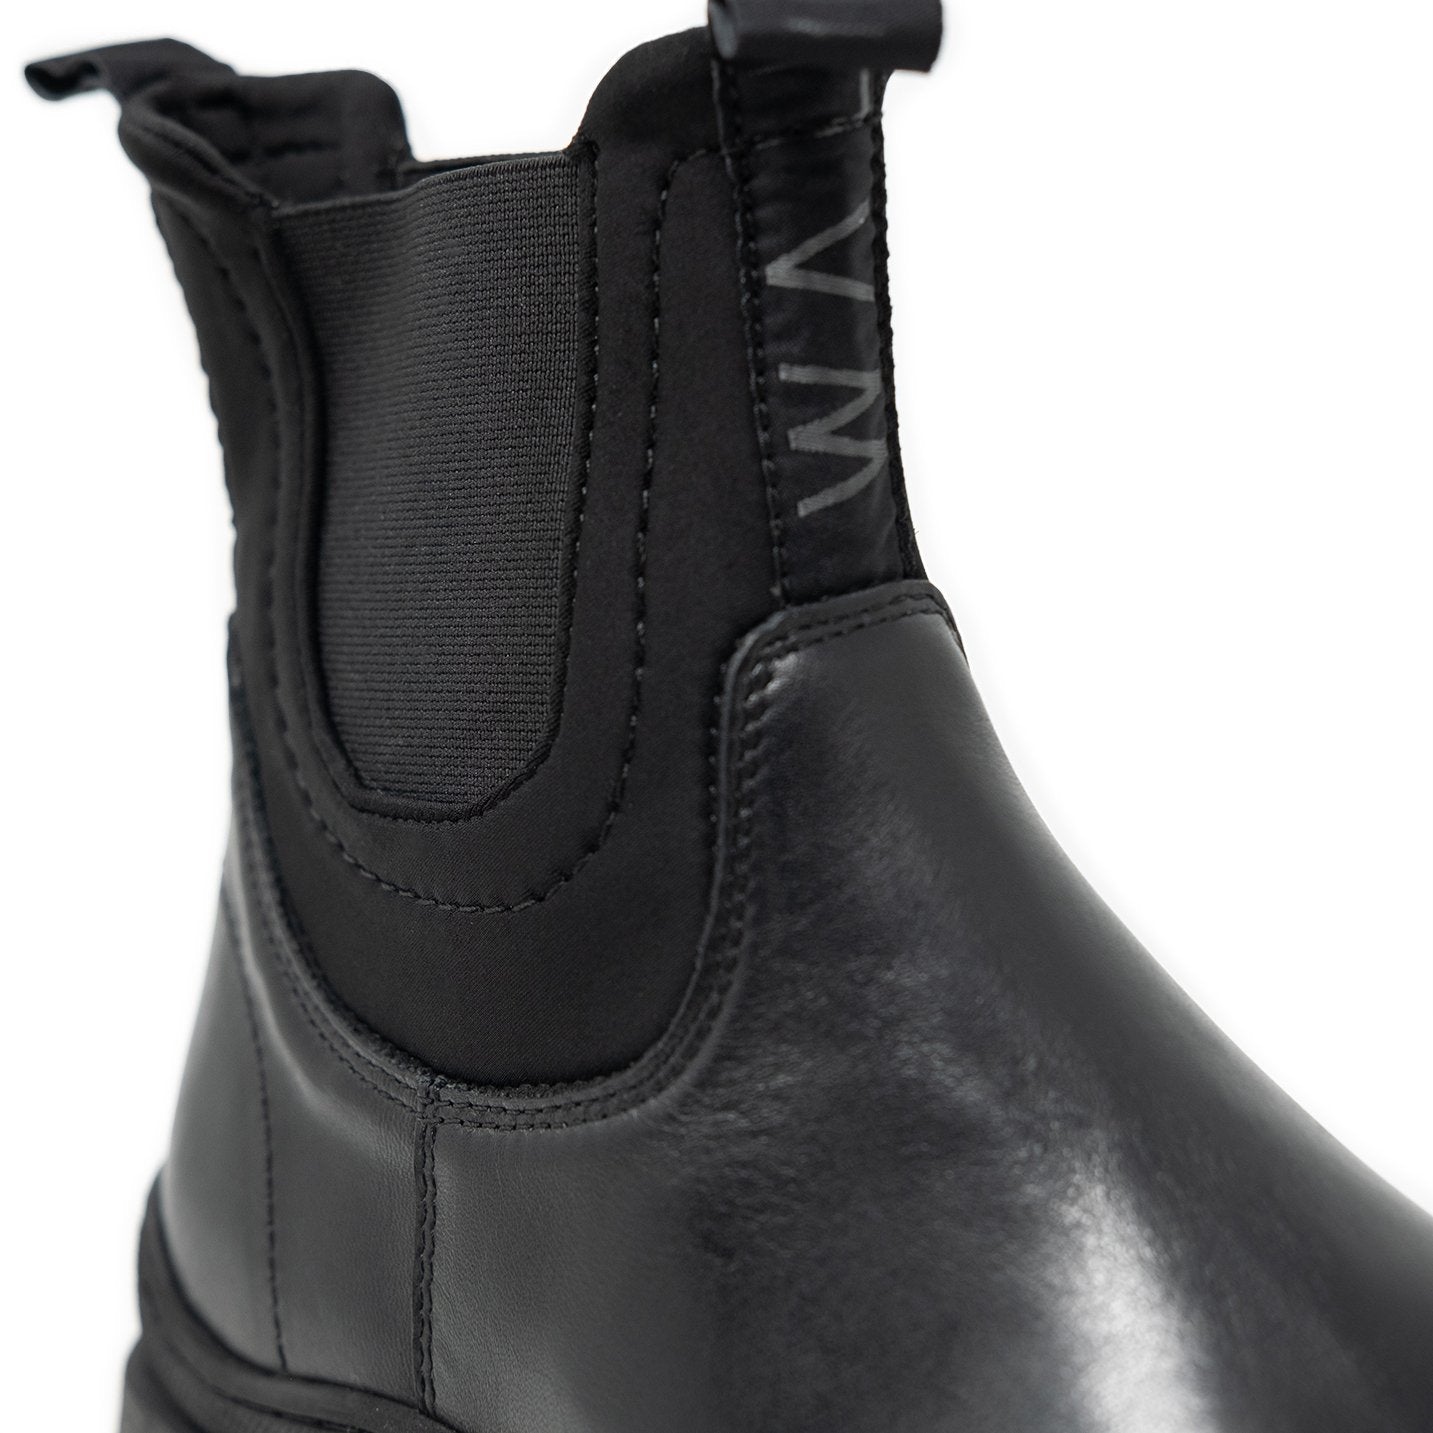 Black Chelsea Boots With Neoprene Ankle